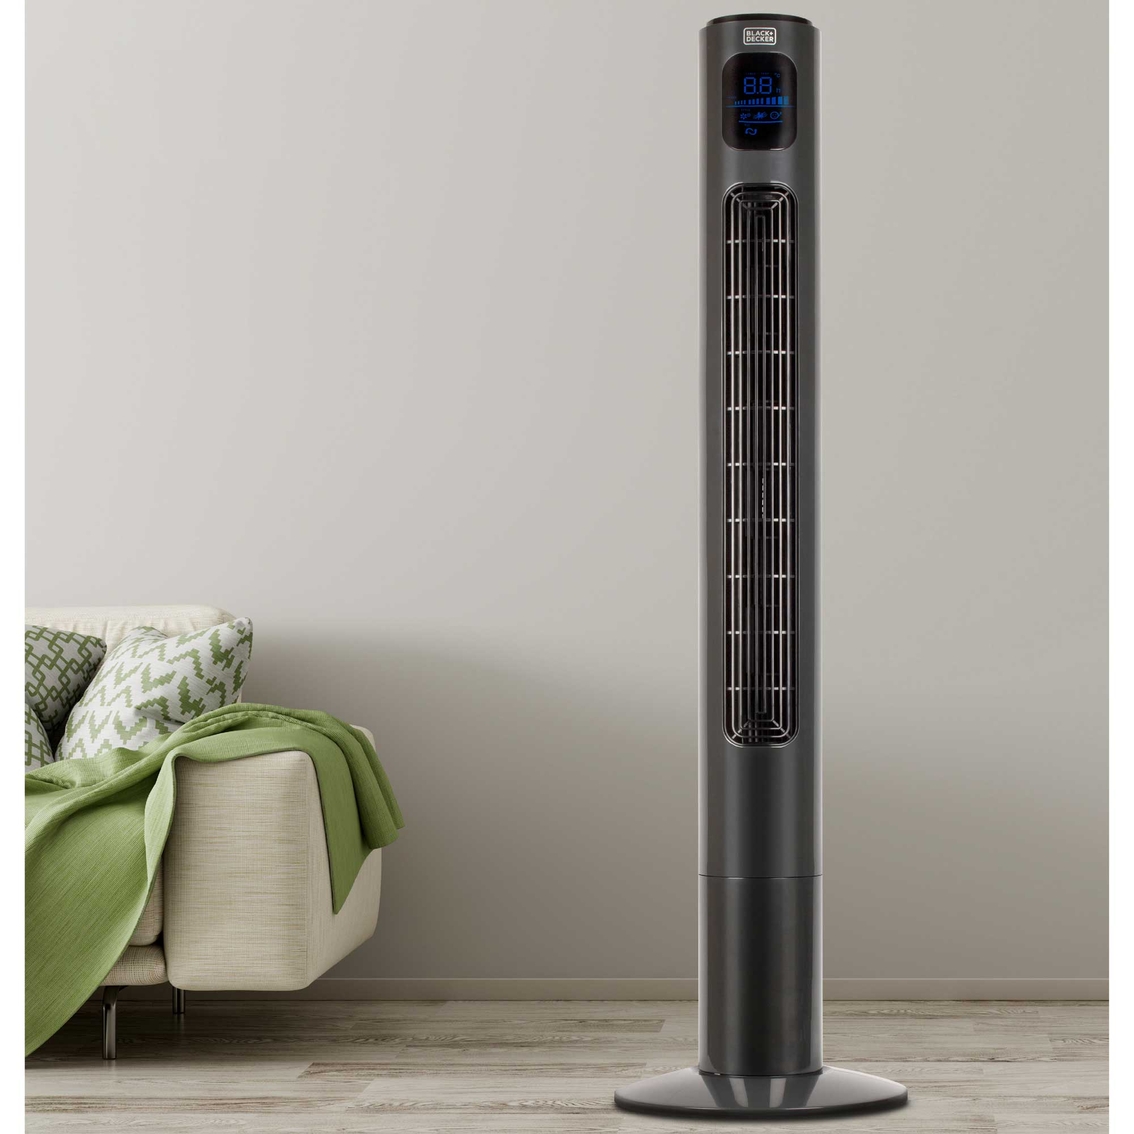 Black + Decker 46 in. Tower Fan with Remote - Image 3 of 7